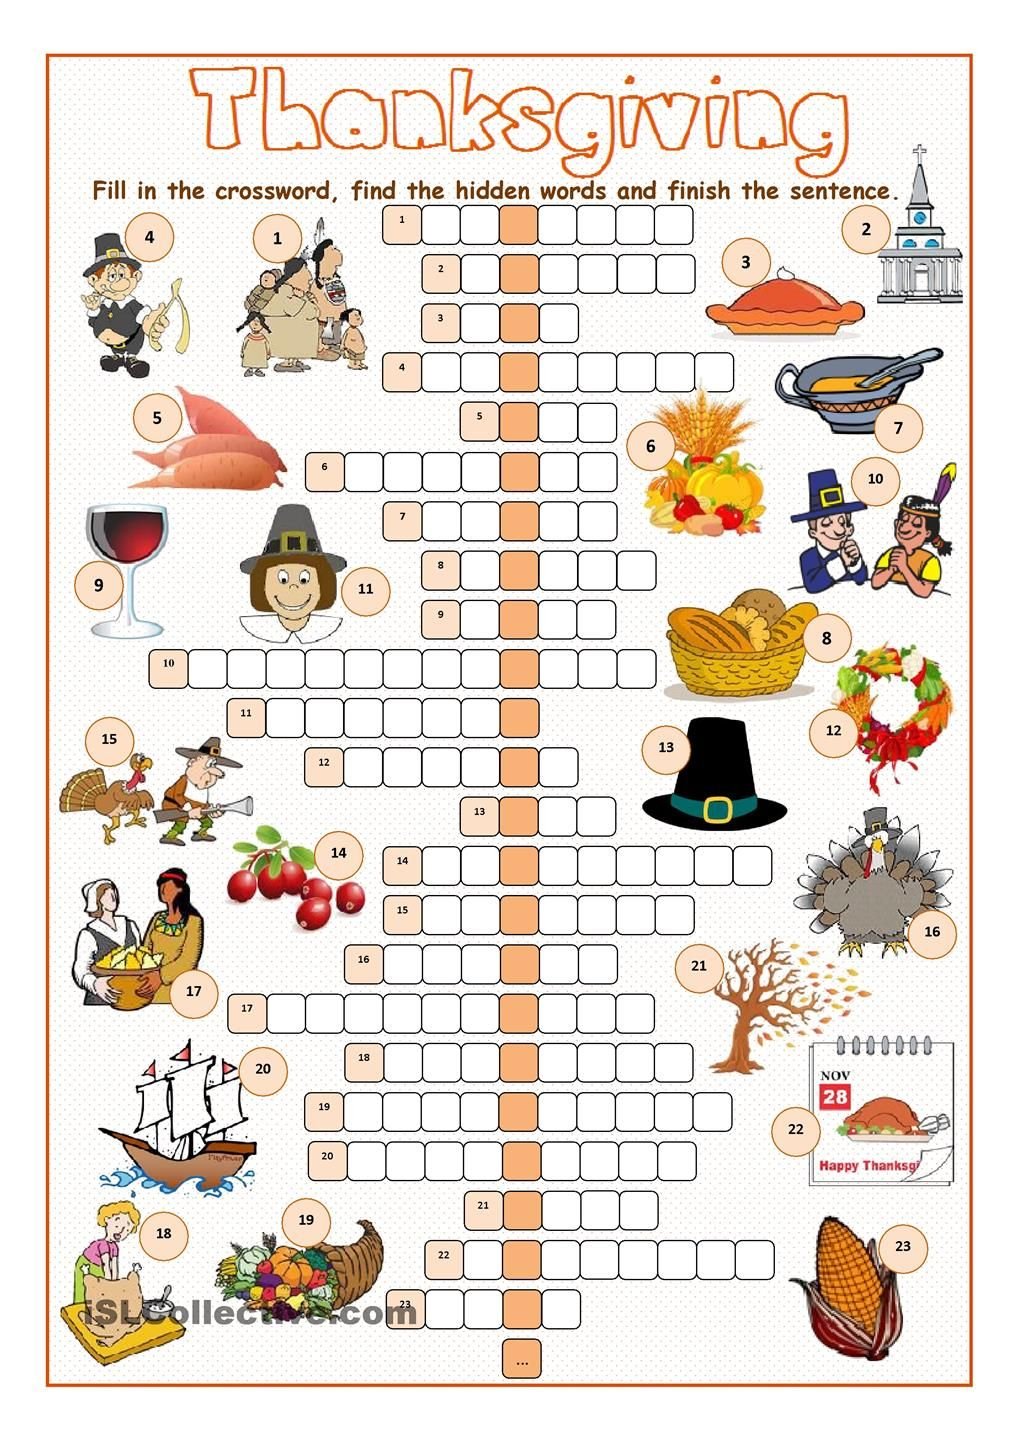 Thanksgiving Crossword Puzzle … | Puzzles | Thank… - Thanksgiving Crossword Puzzle Printable